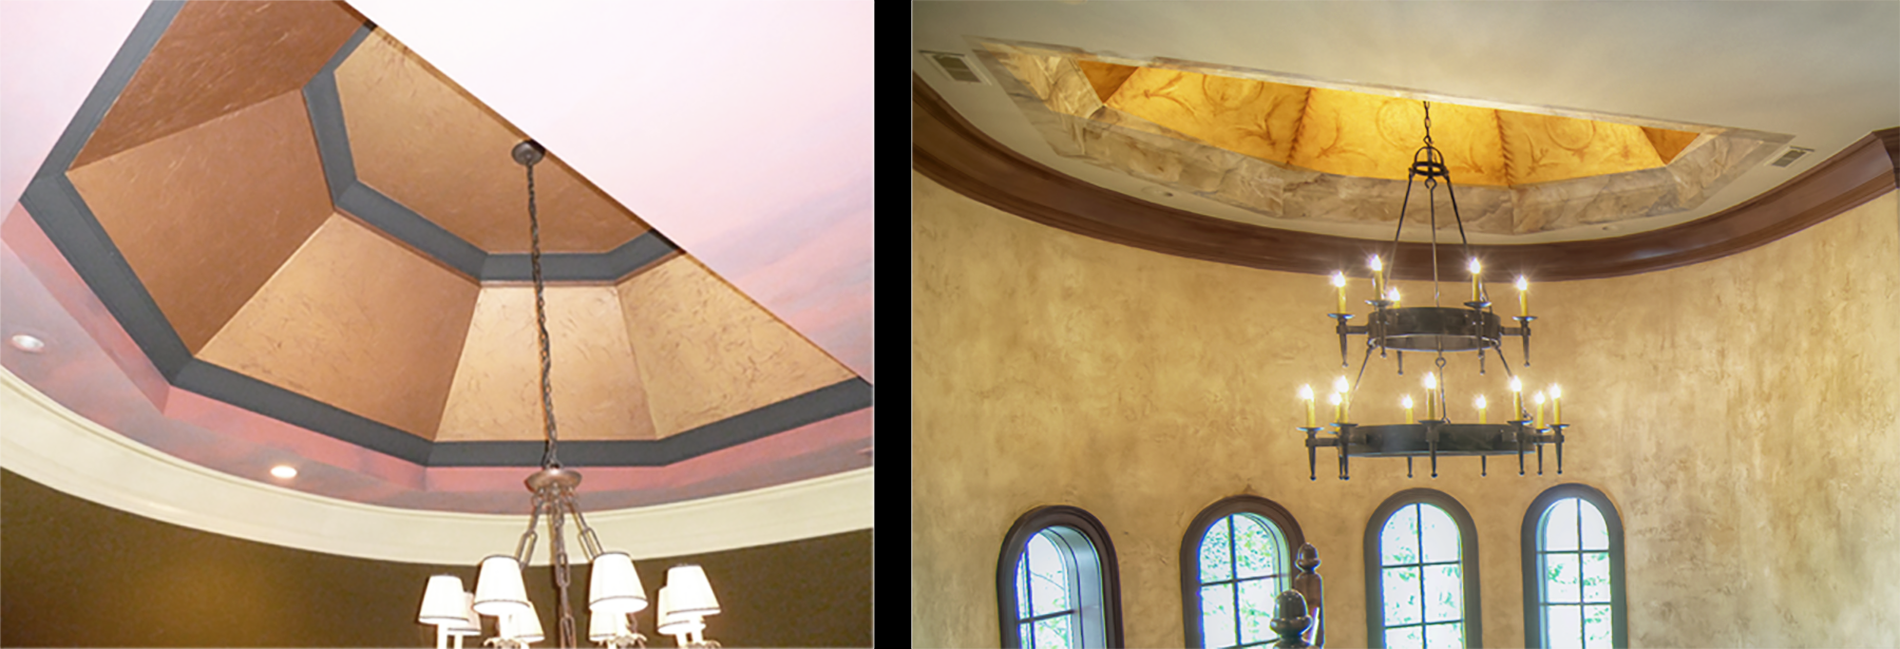 before and after metallic gold leaf dome design